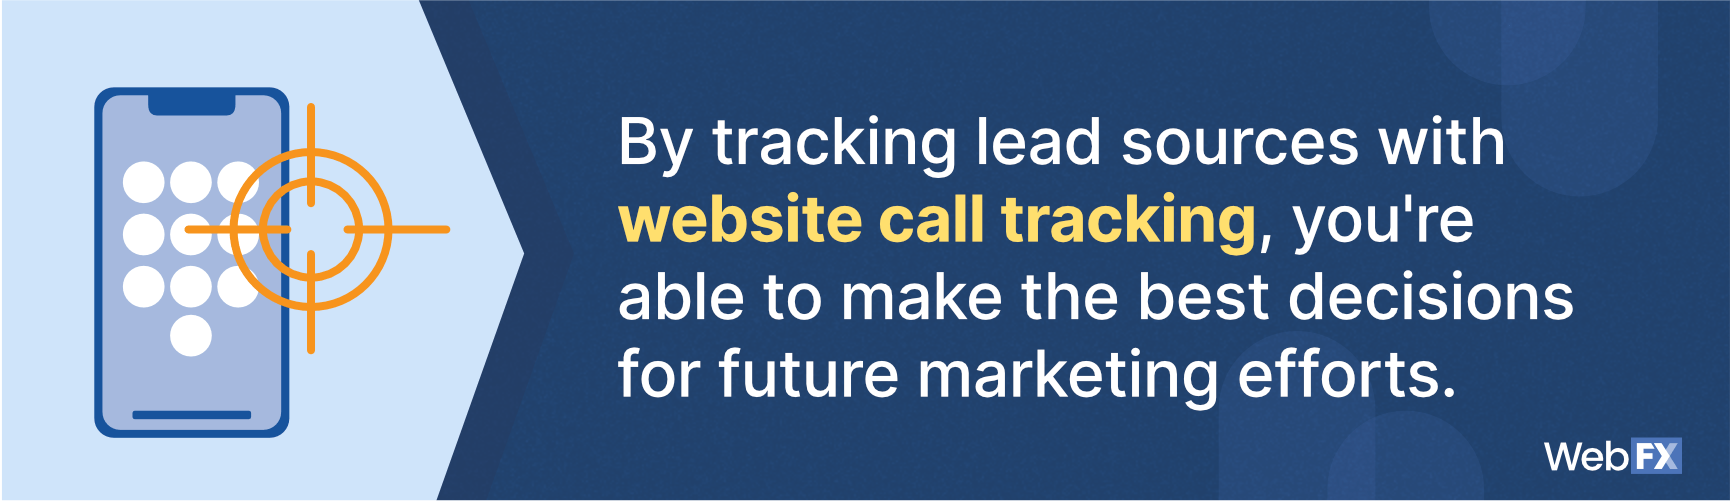 Call tracking benefits